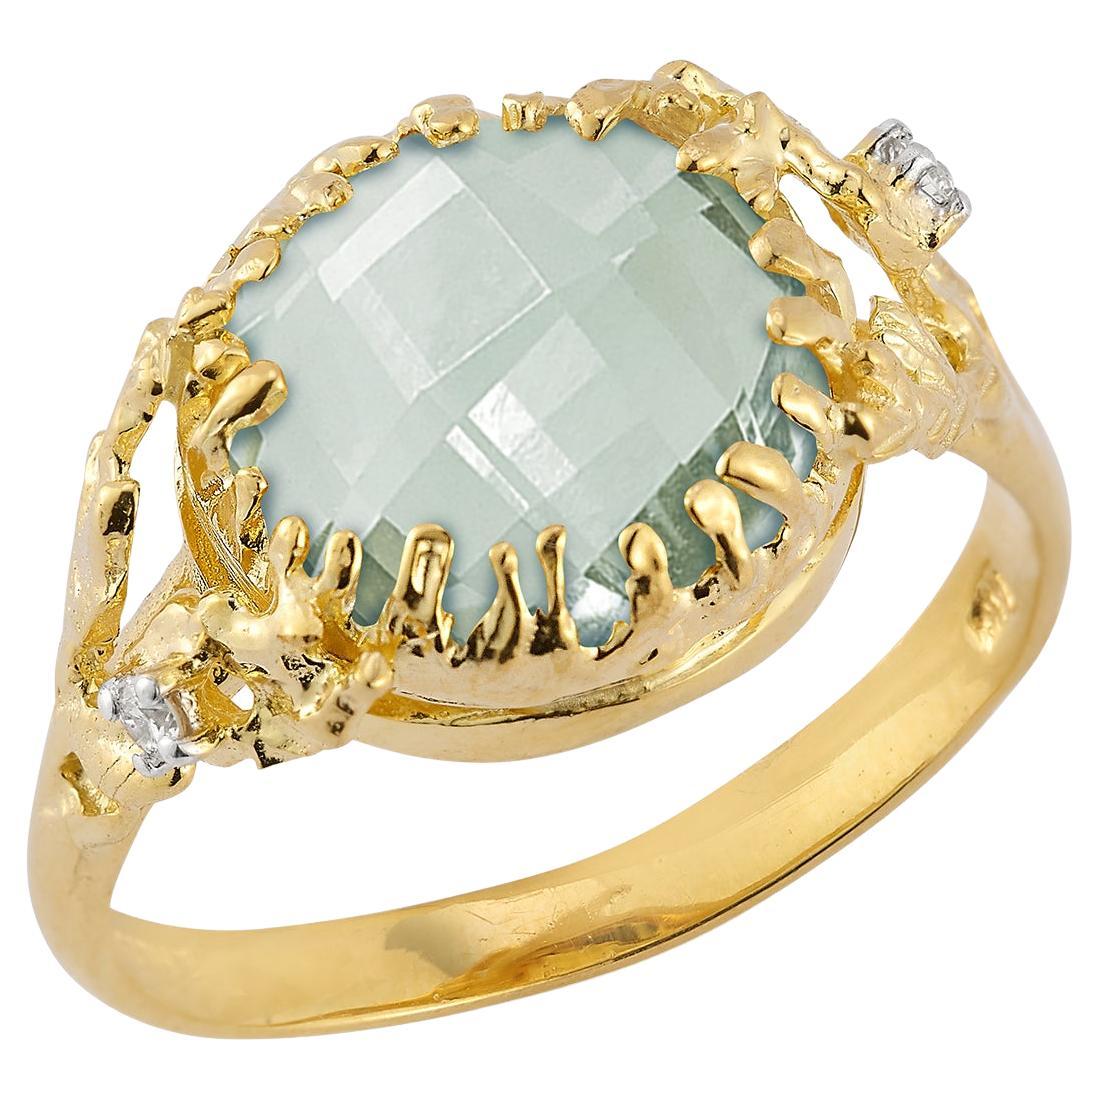 For Sale:  Hand-Crafted 14K Gold 0.03 ct. tw. Diamond & 3.25CT Green Amethyst Ring